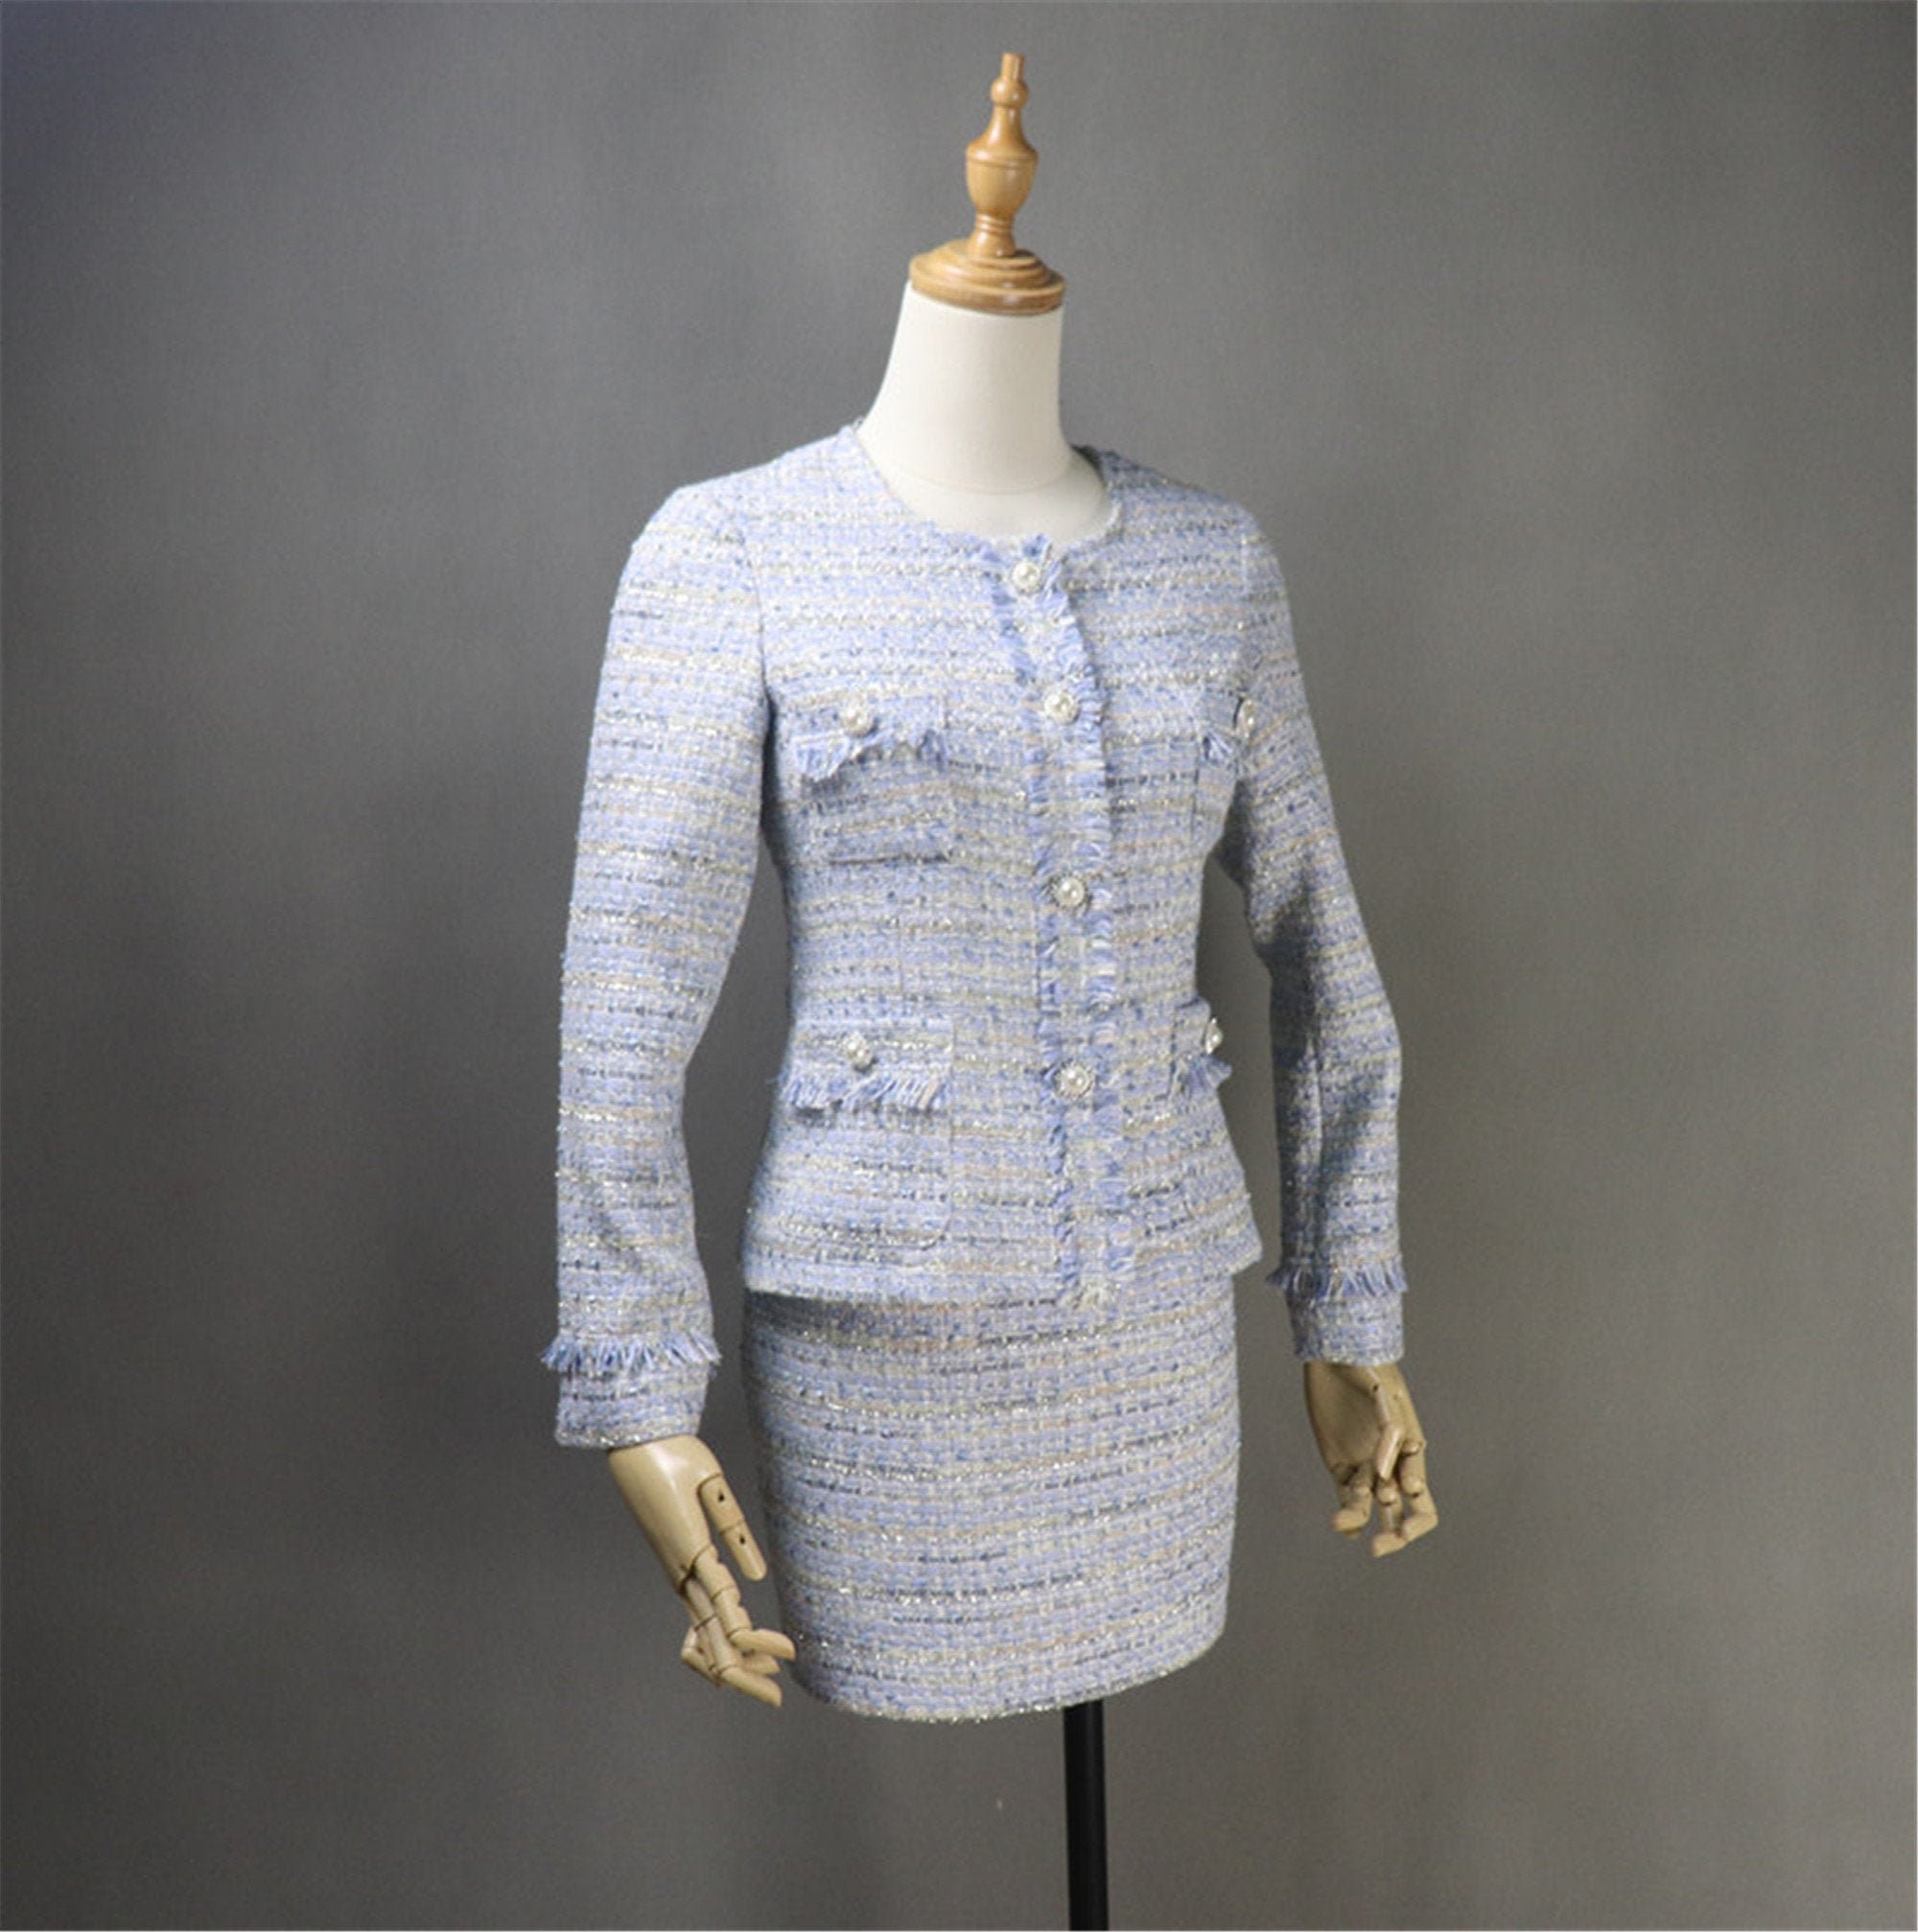 Chanel Two-Piece Tweed Skirt Suit, Spring 2005